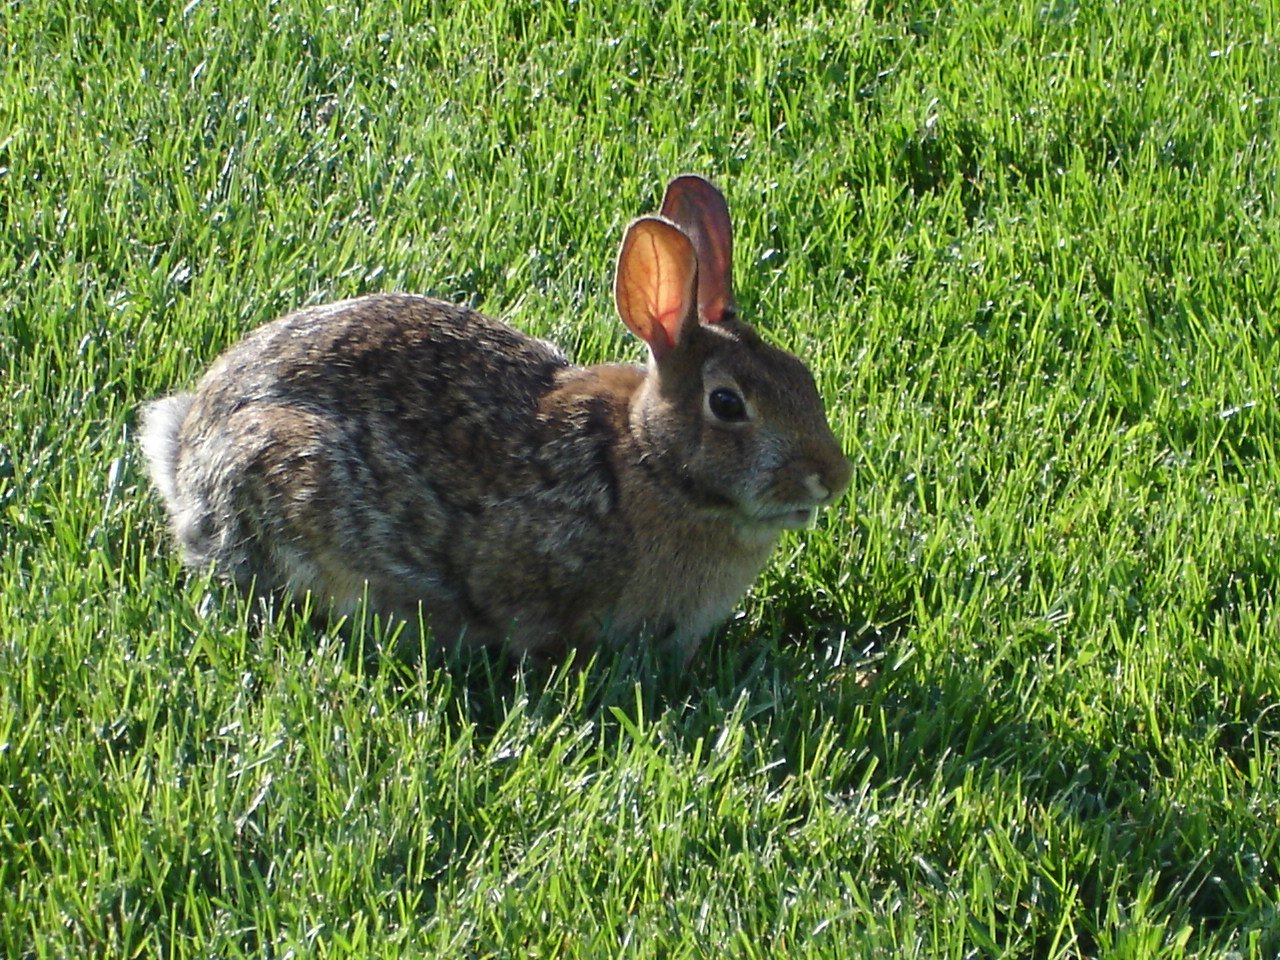 the bunny rabbit is sitting in a green field